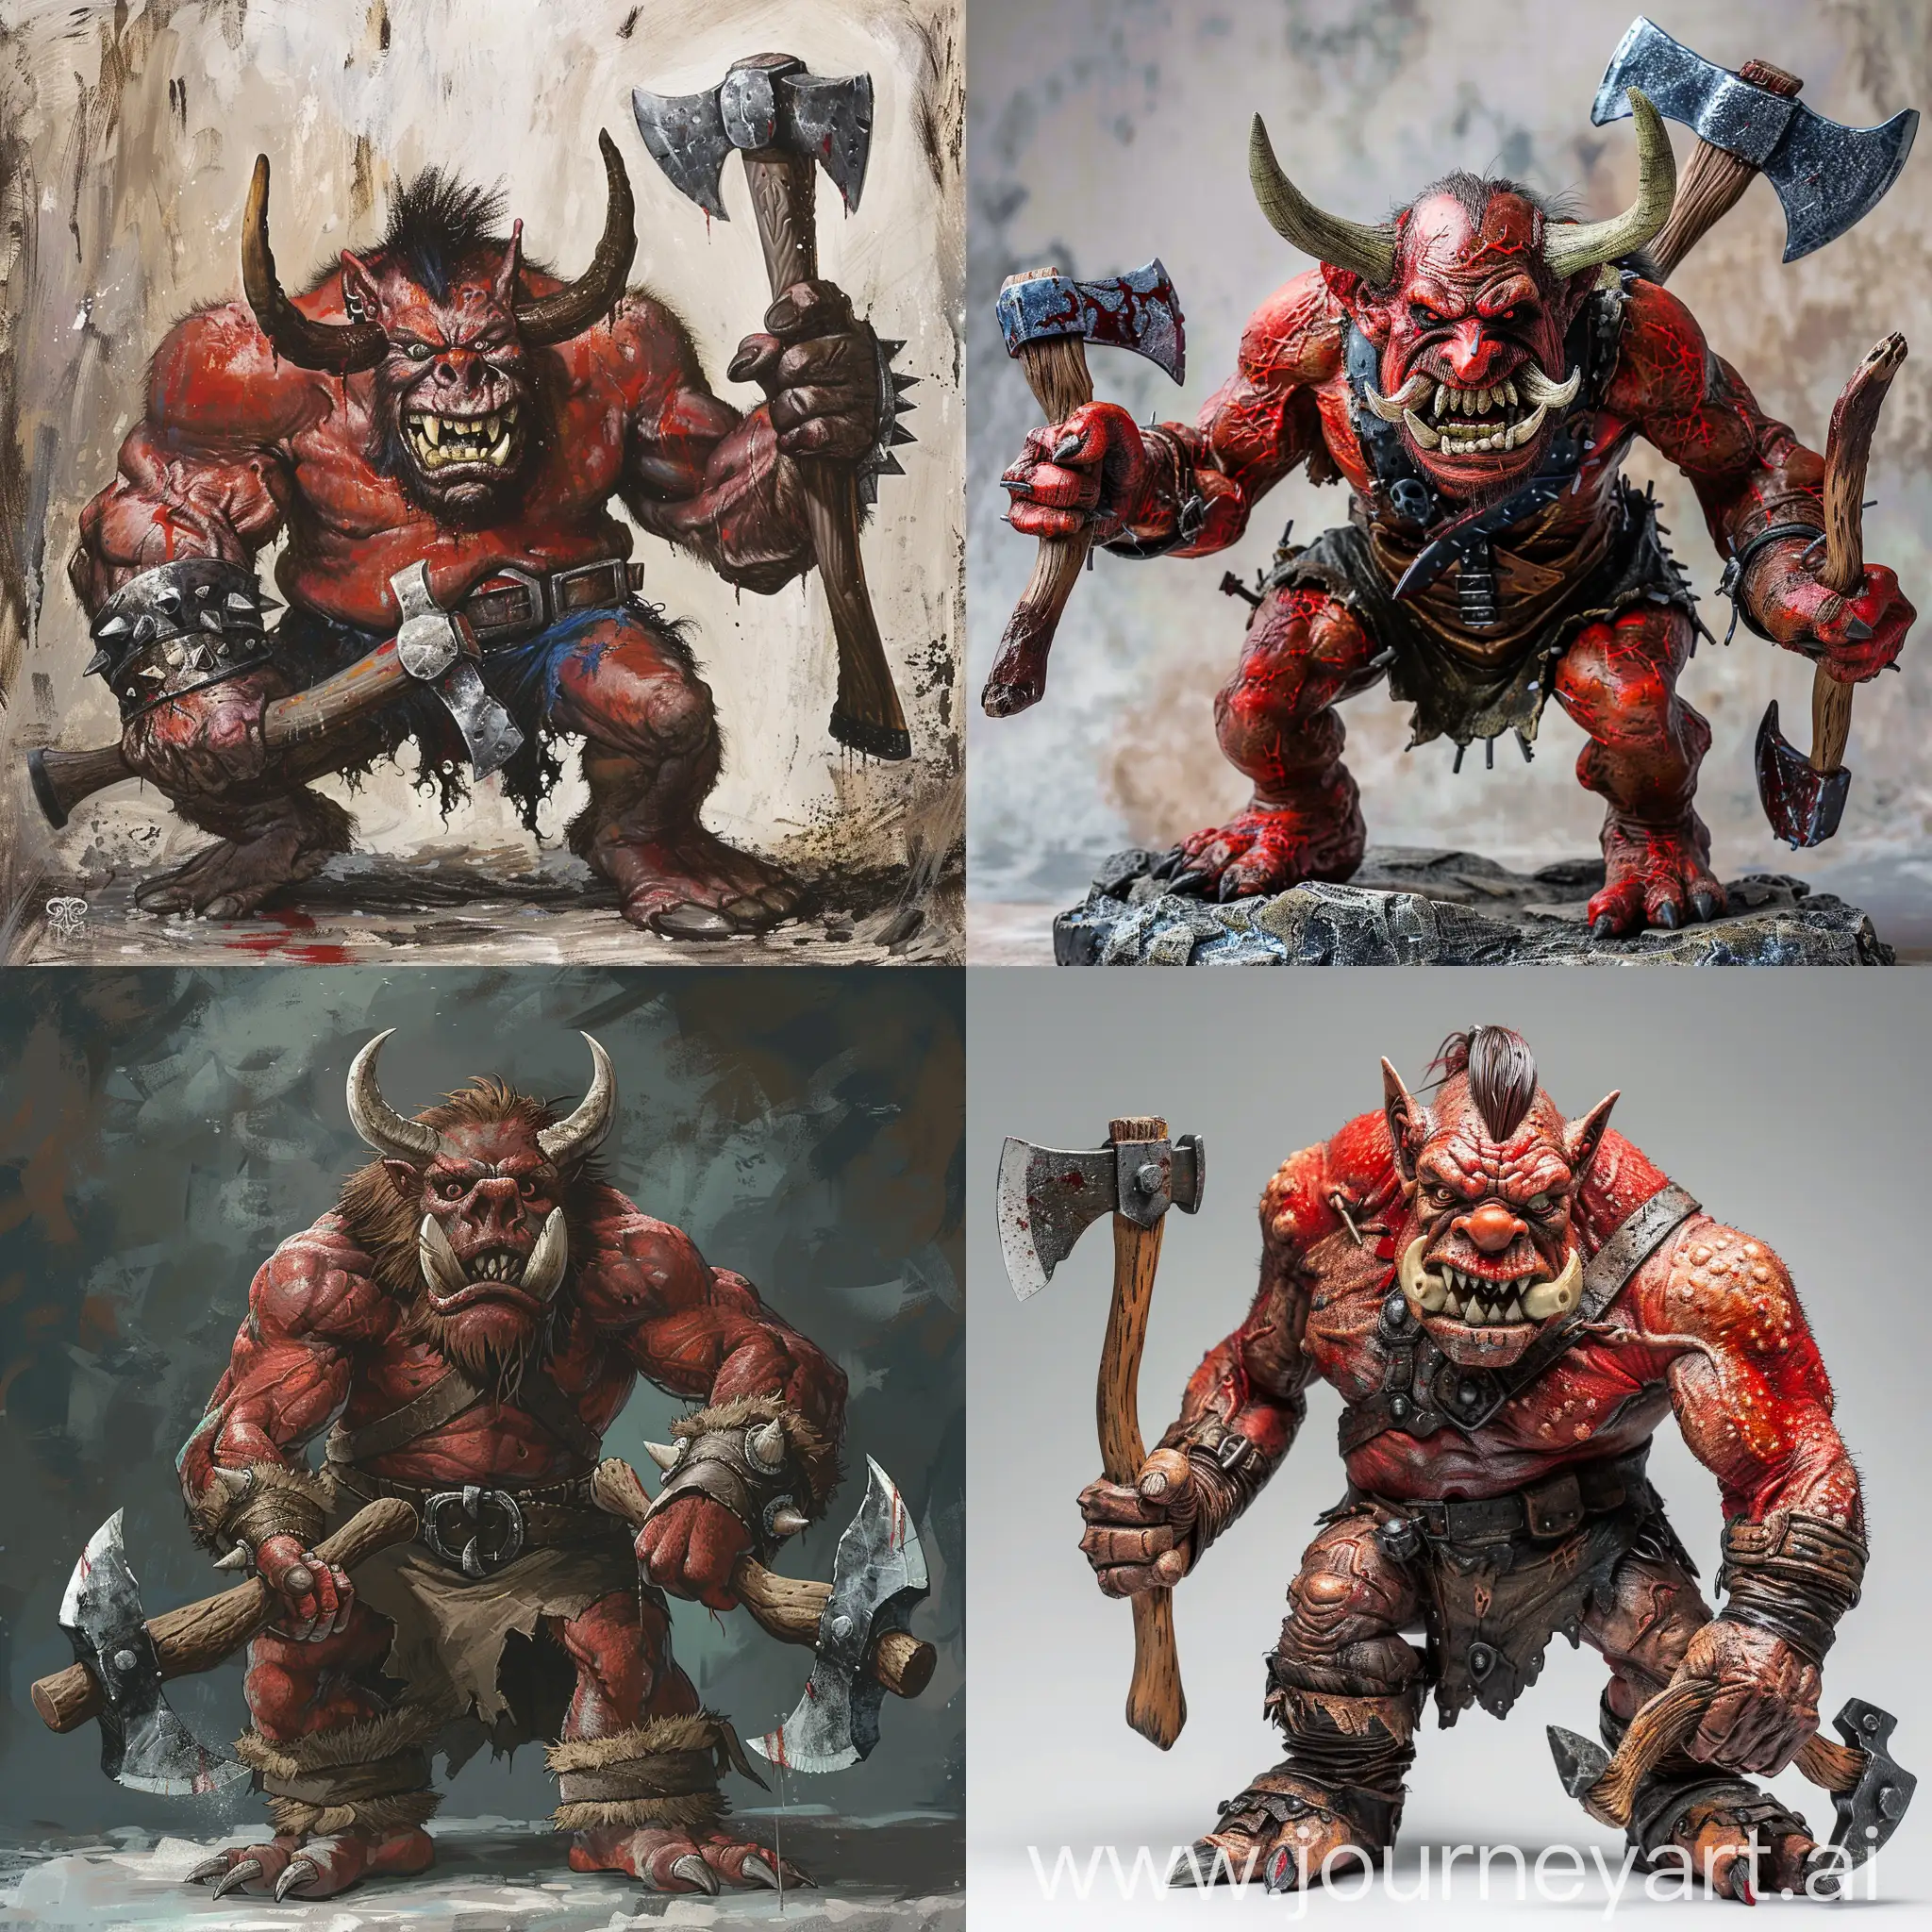 Fierce-Red-Troll-Warrior-with-Axes